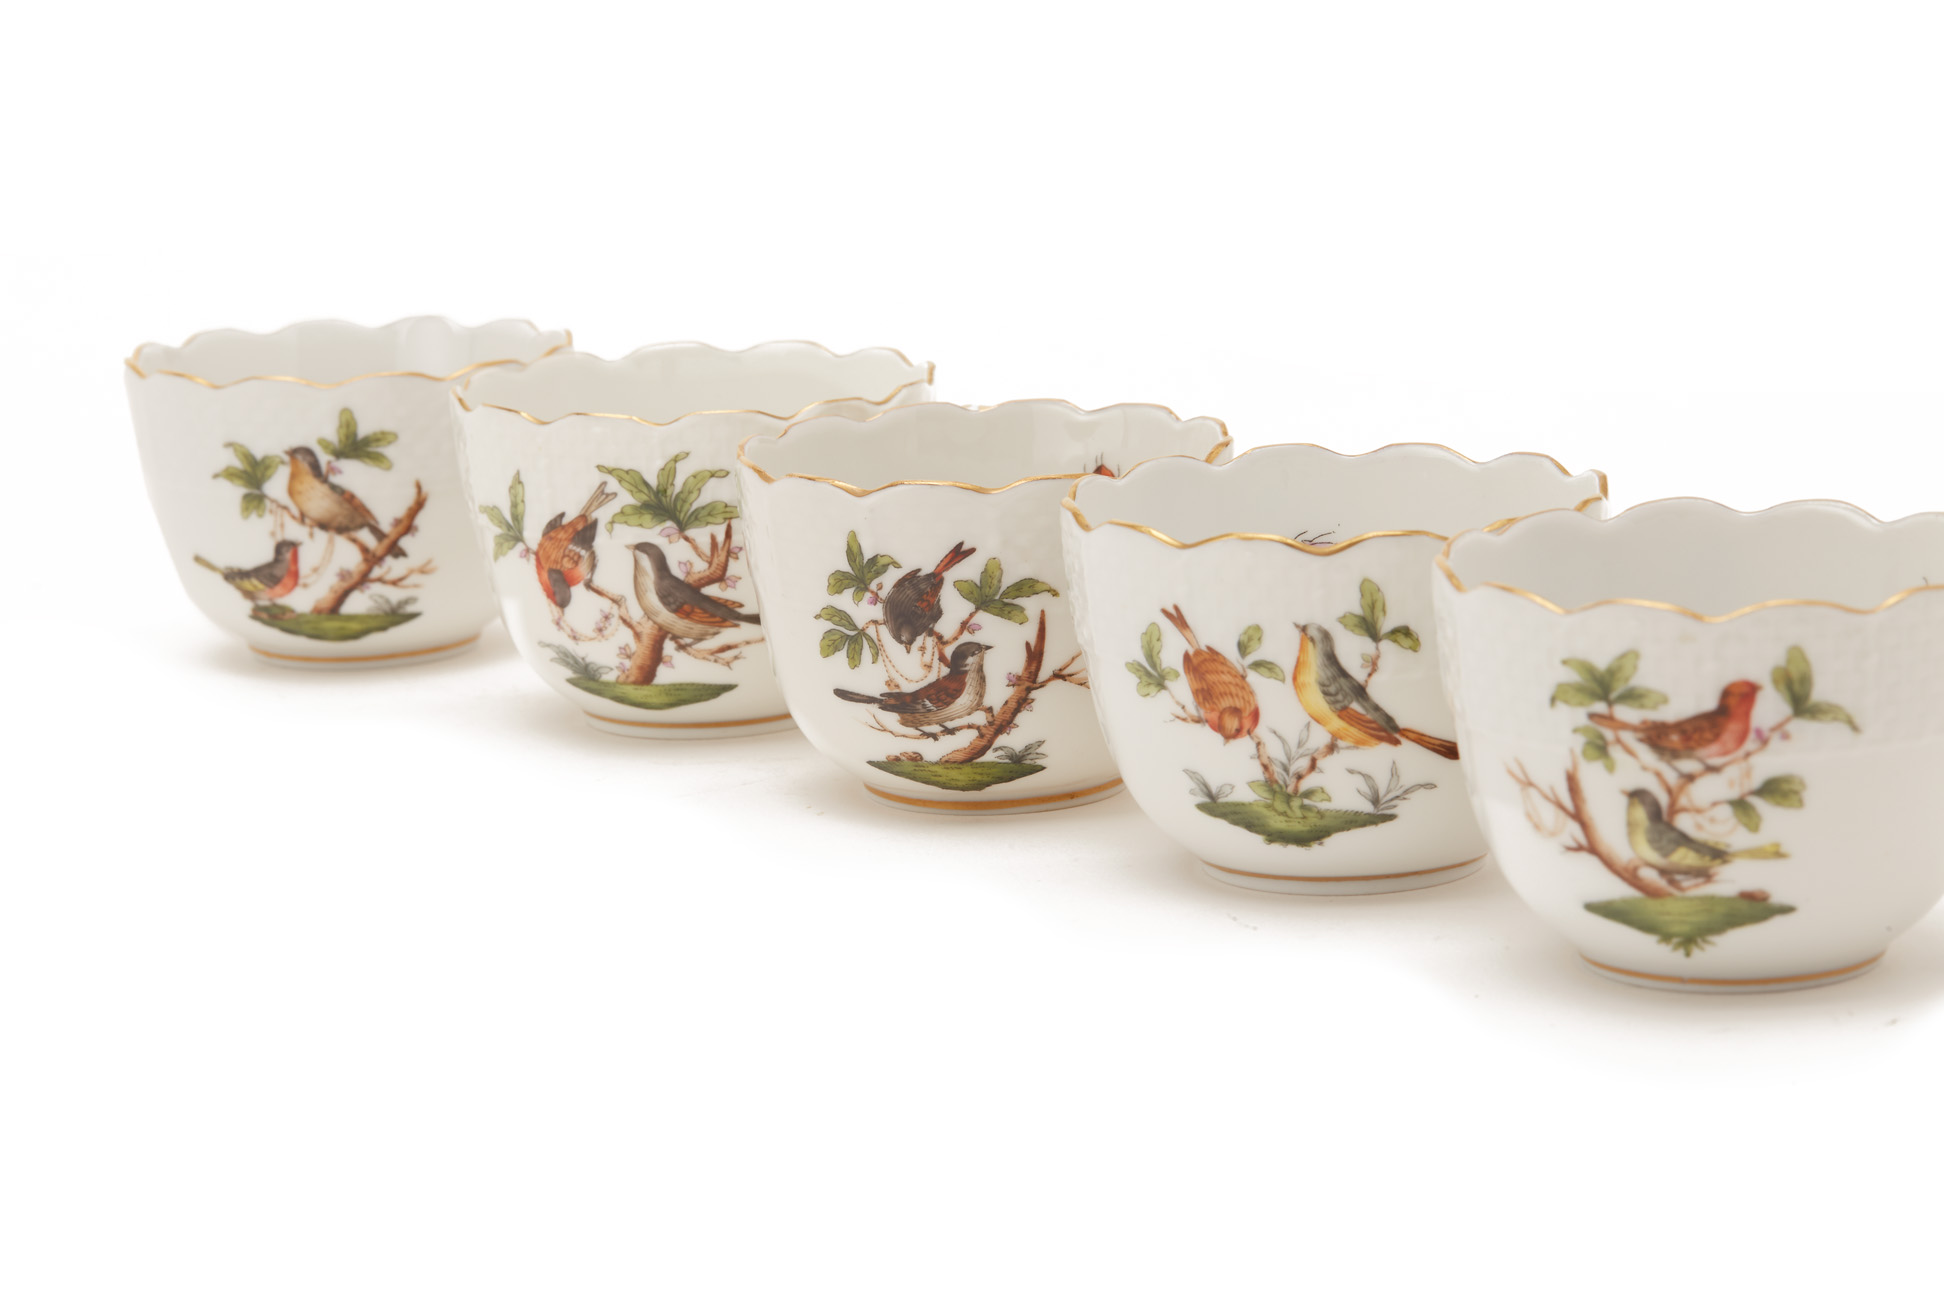 A HEREND PORCELAIN COFFEE SERVICE - Image 7 of 7